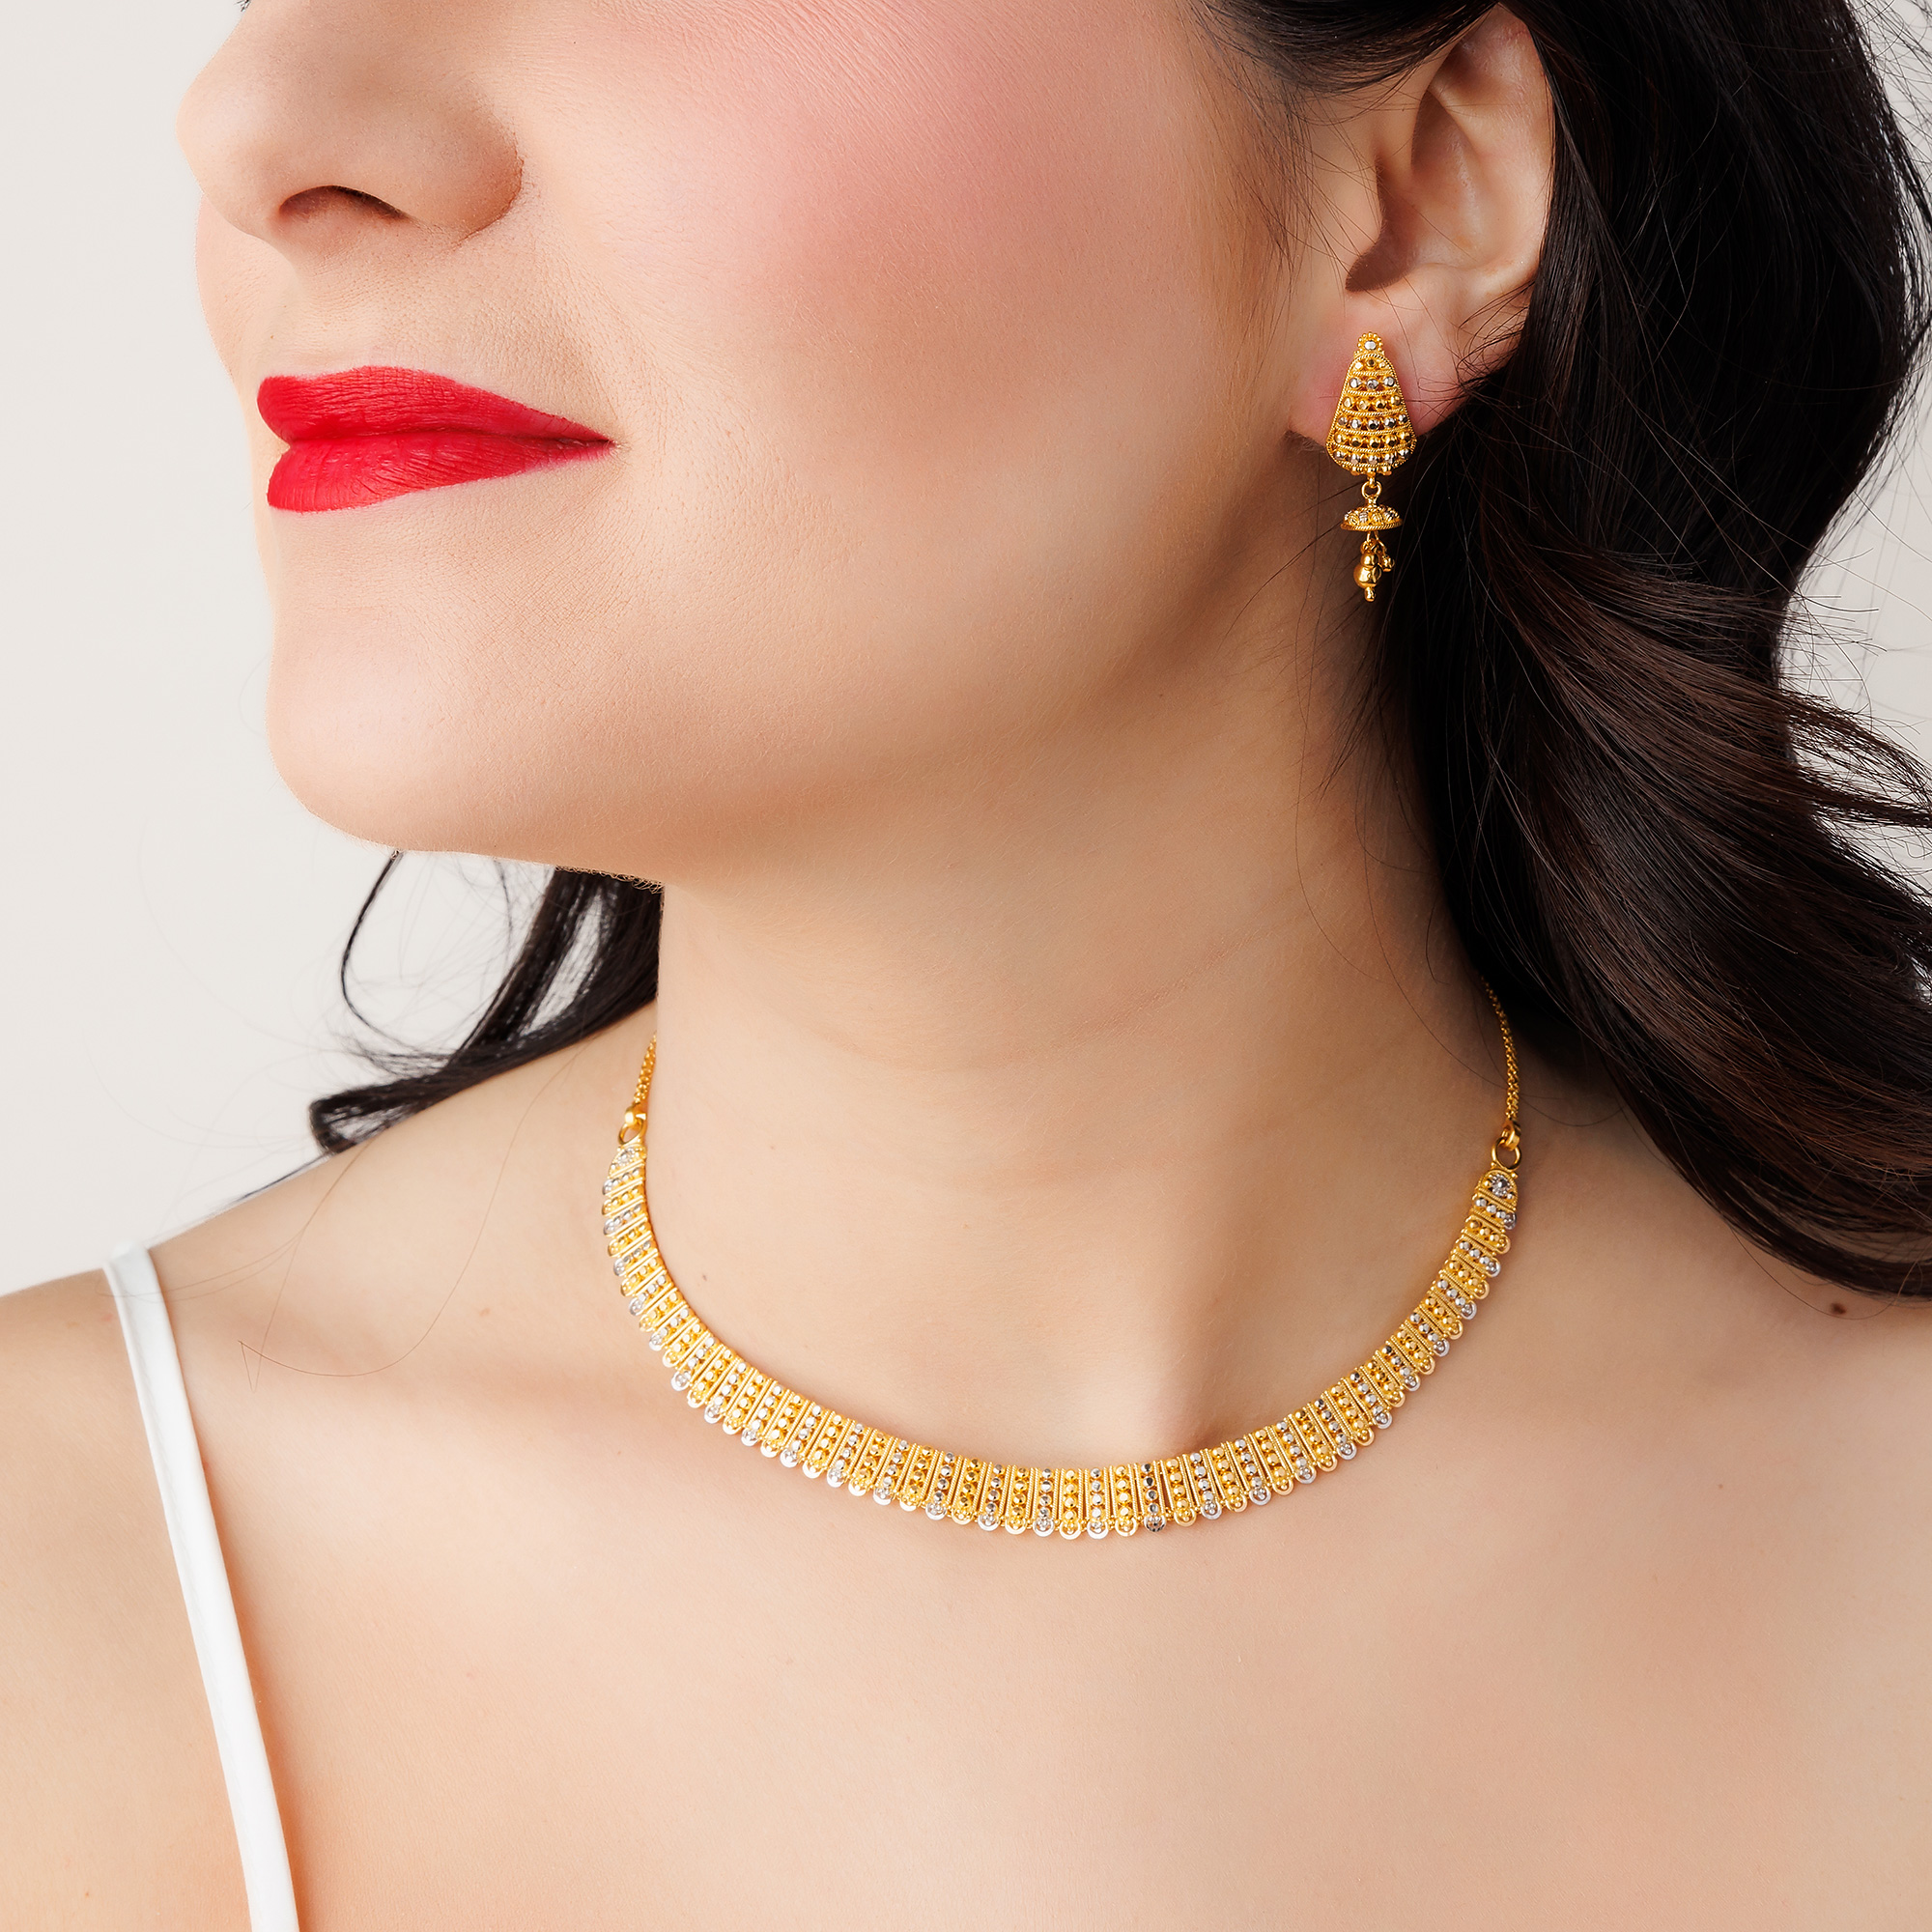 Gold Choker Necklaces | Gold temple jewellery, Temple jewellery, Choker  necklace designs